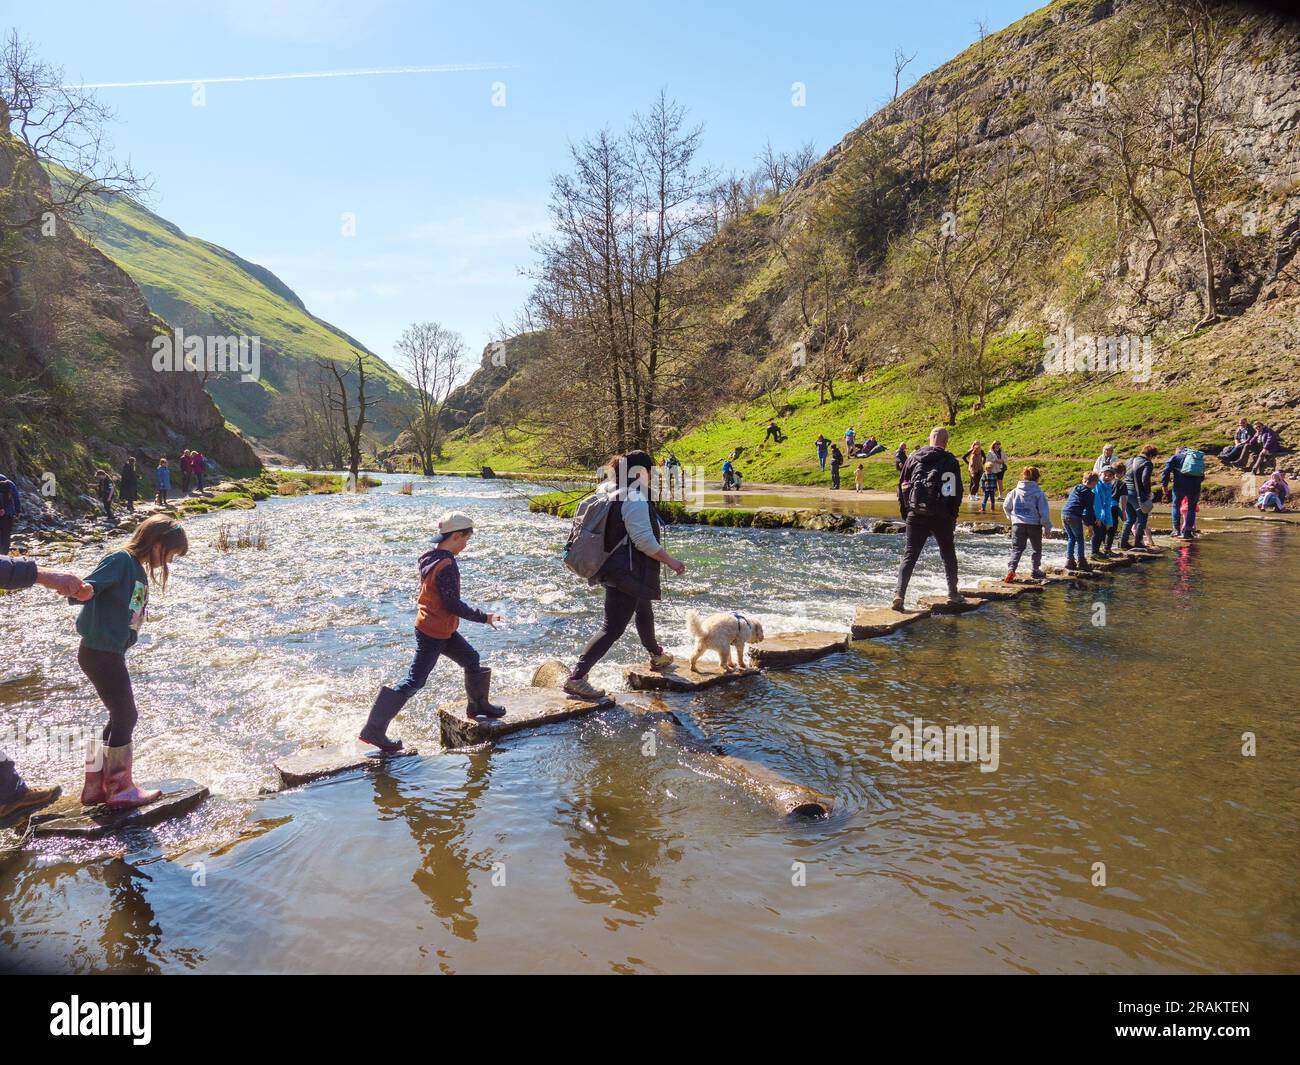 People crossing the Stepping Stones over the River Dove in the Peak District, England, UK Stock Photo